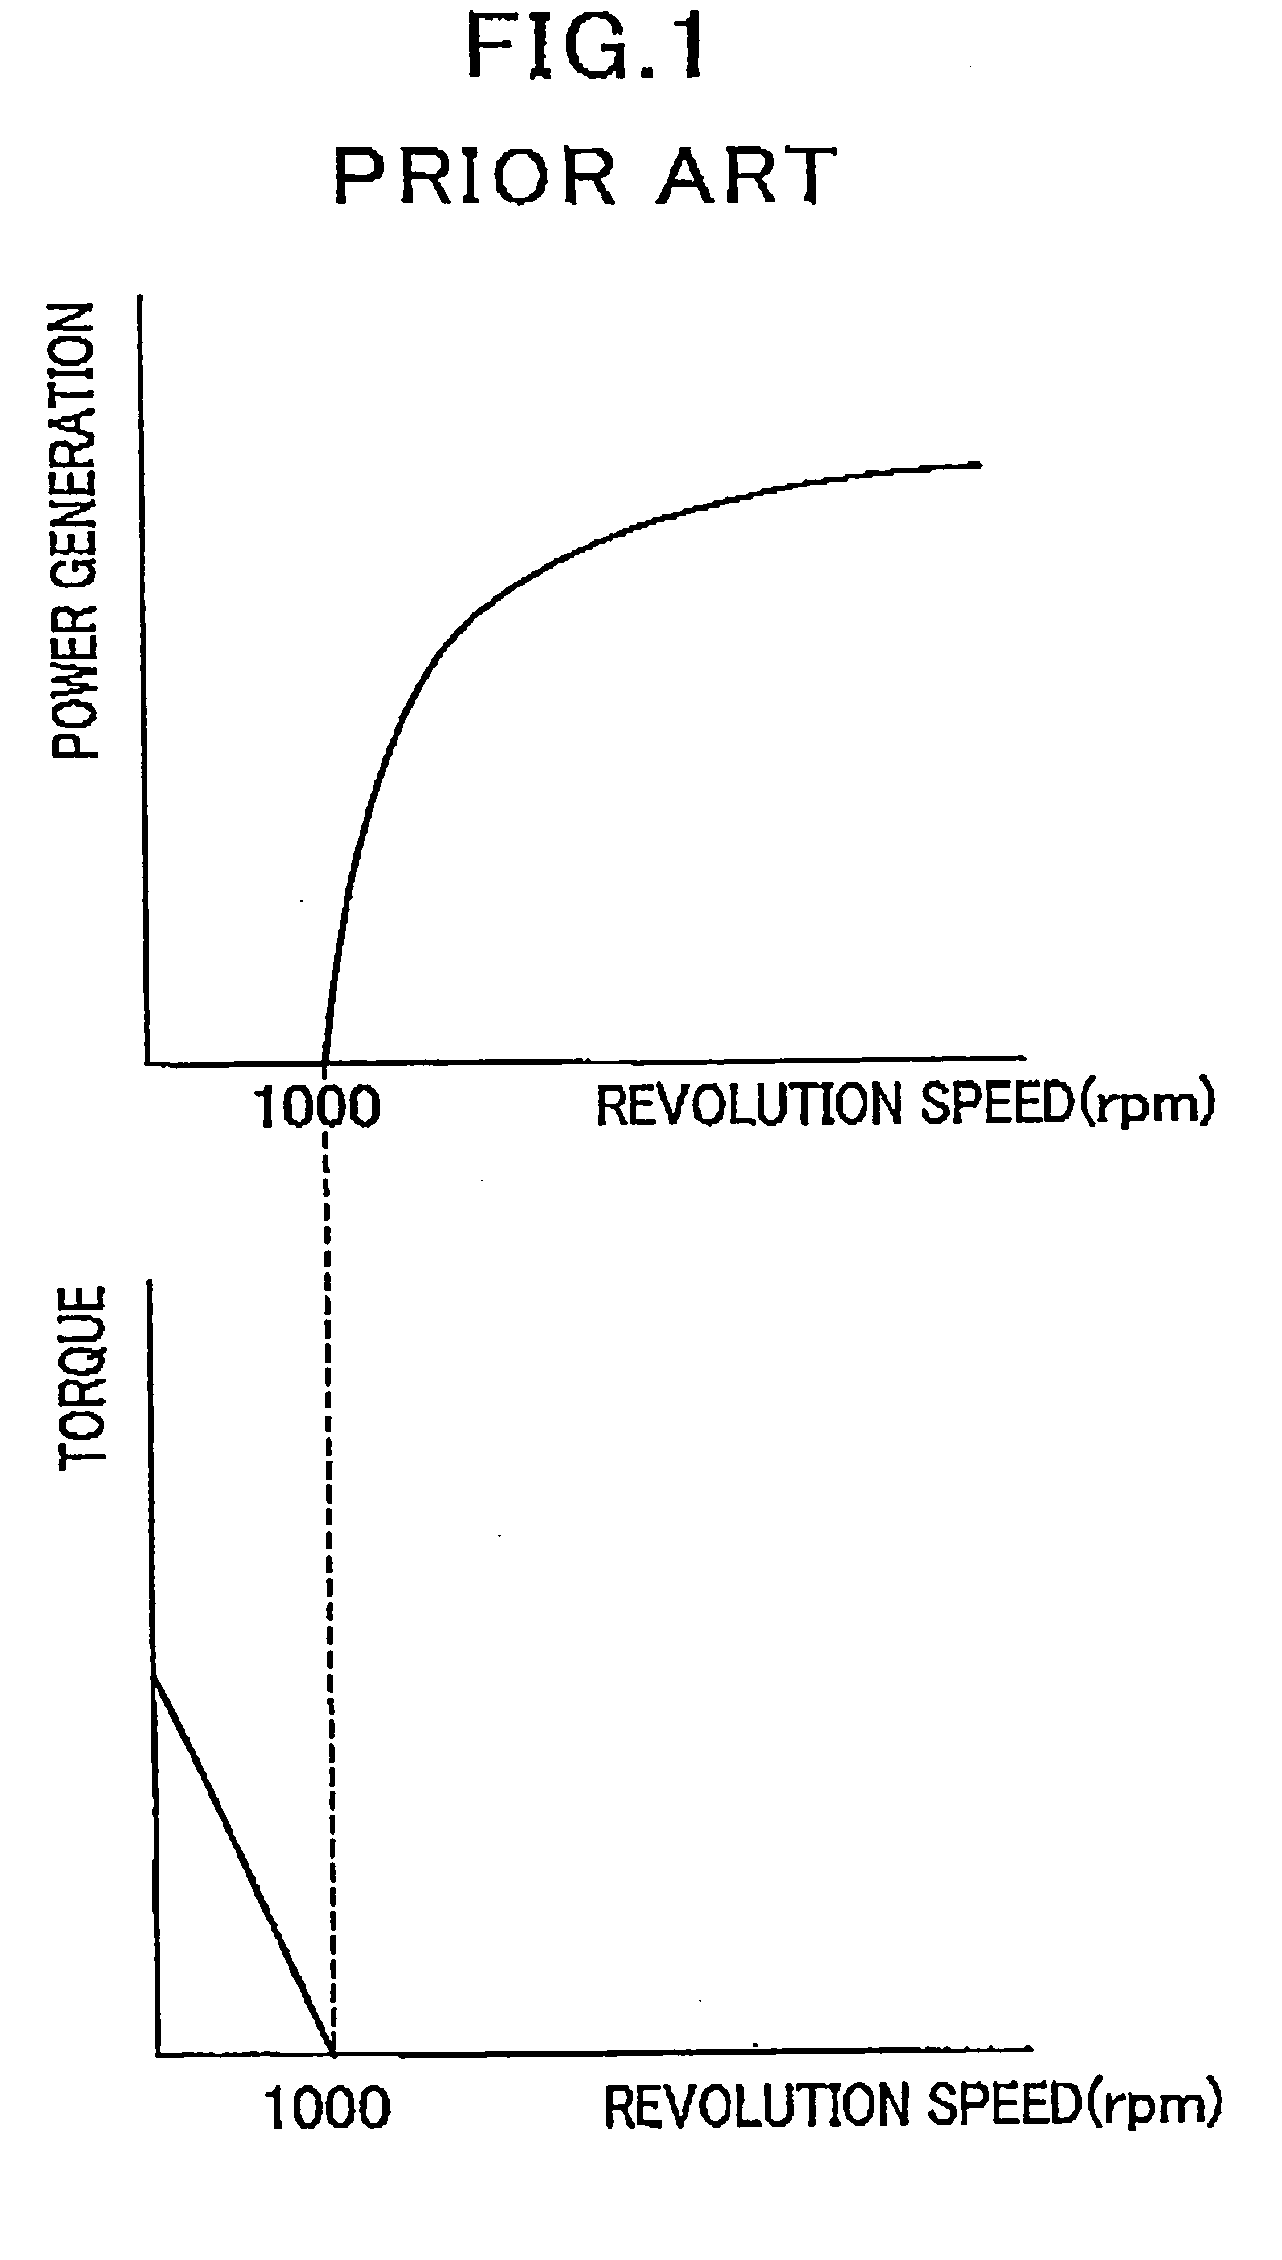 On-vehicle rotary electric machine operating on two modes of rectification